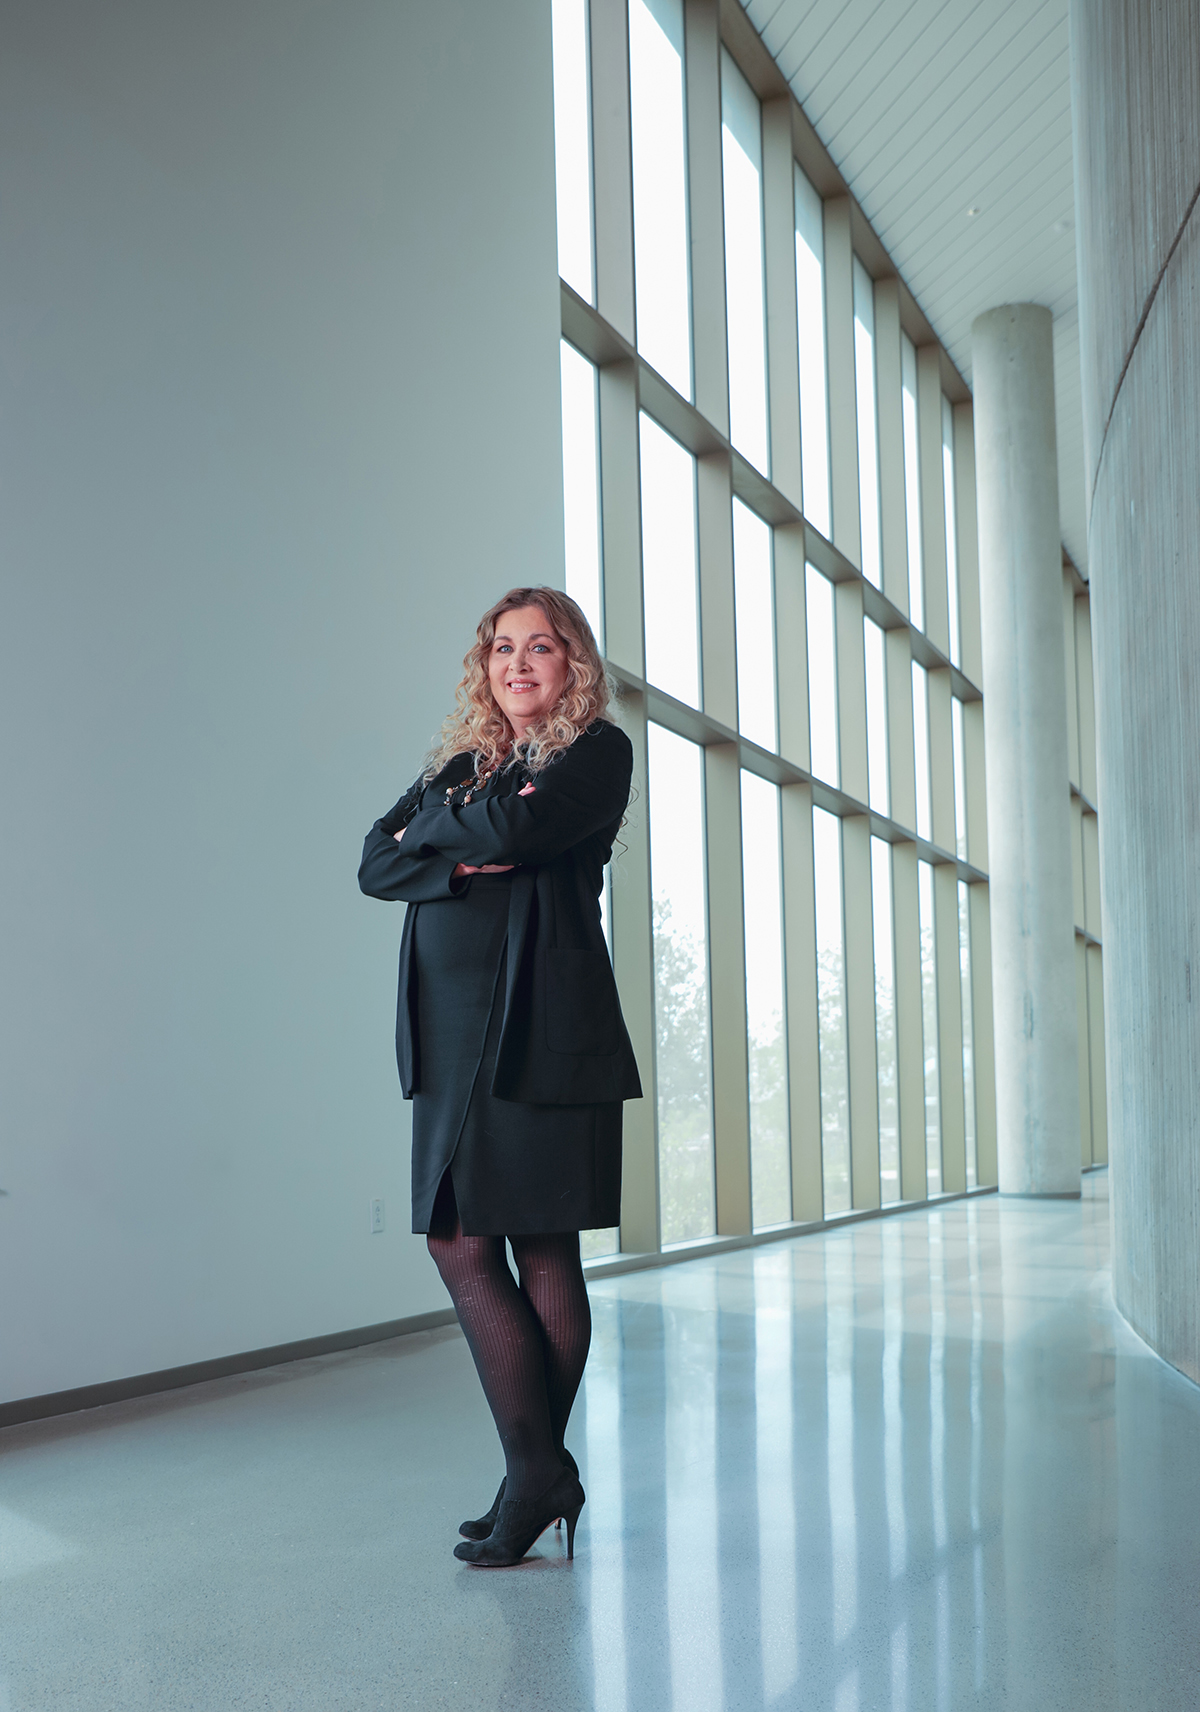 Texas A&amp;M chemist Karen Wooley smiles for the camera, arms folded across her chest and standing in a hallway bathed in natural light from a bank of floor-to-ceiling windows